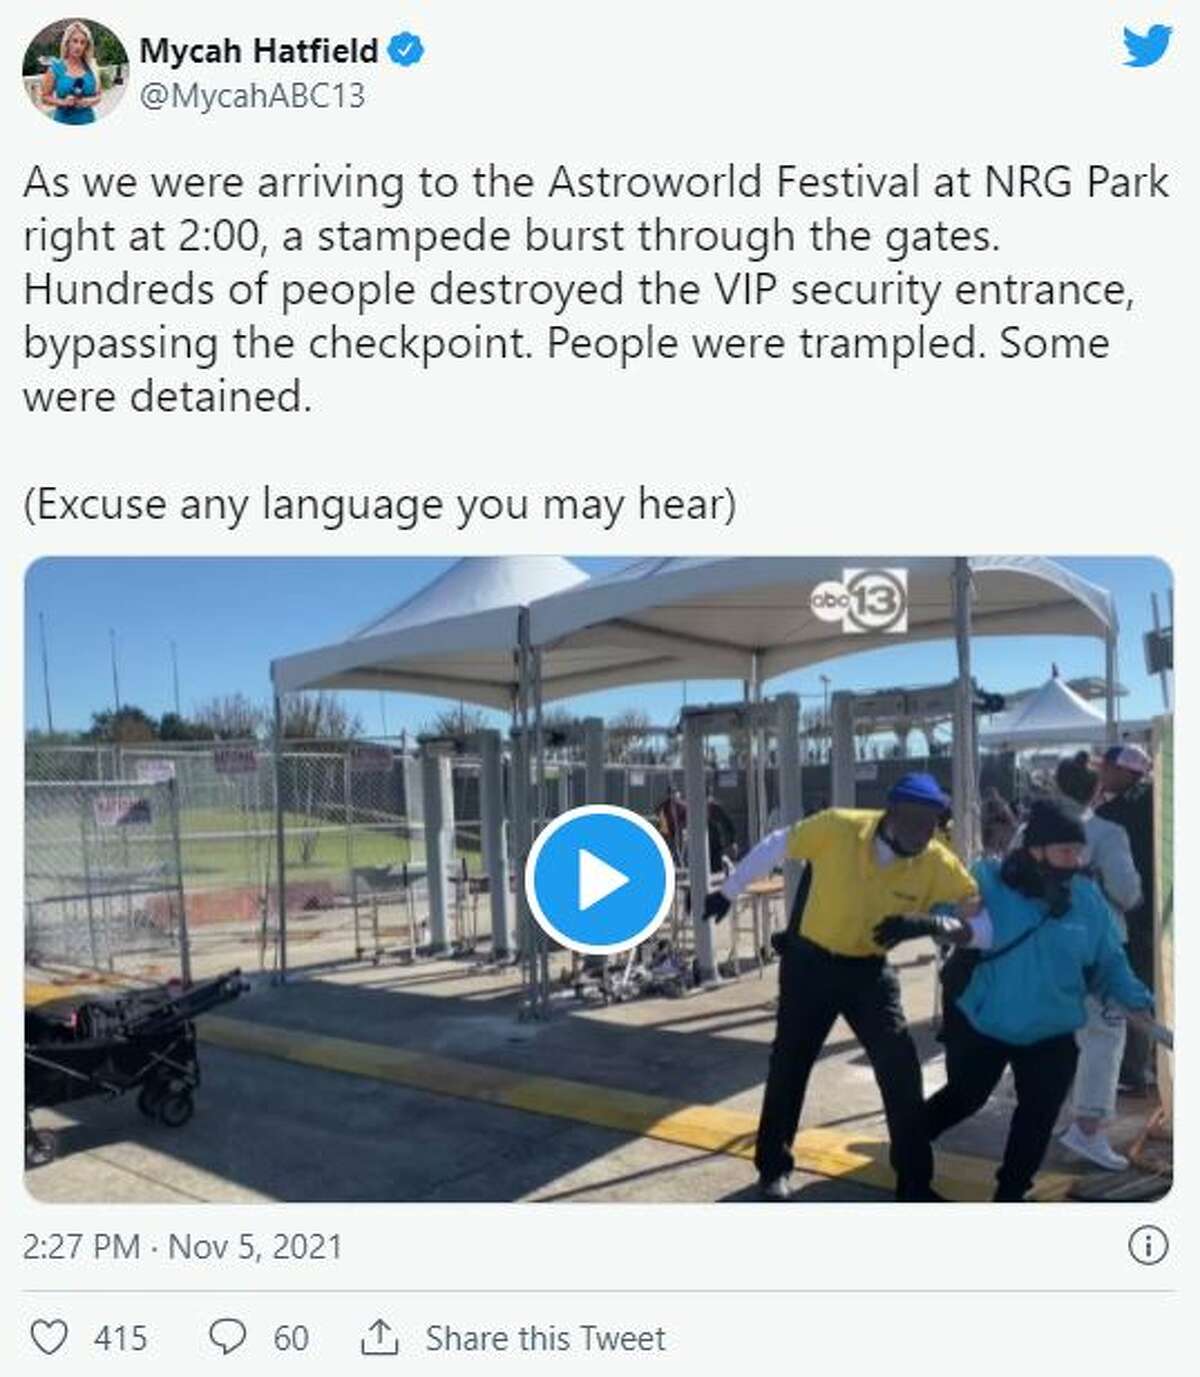 Tweet from KTRK reporter Mycah Hatfield of the incident at the Astroworld Festival at NRG Park on Nov. 5, 2021.